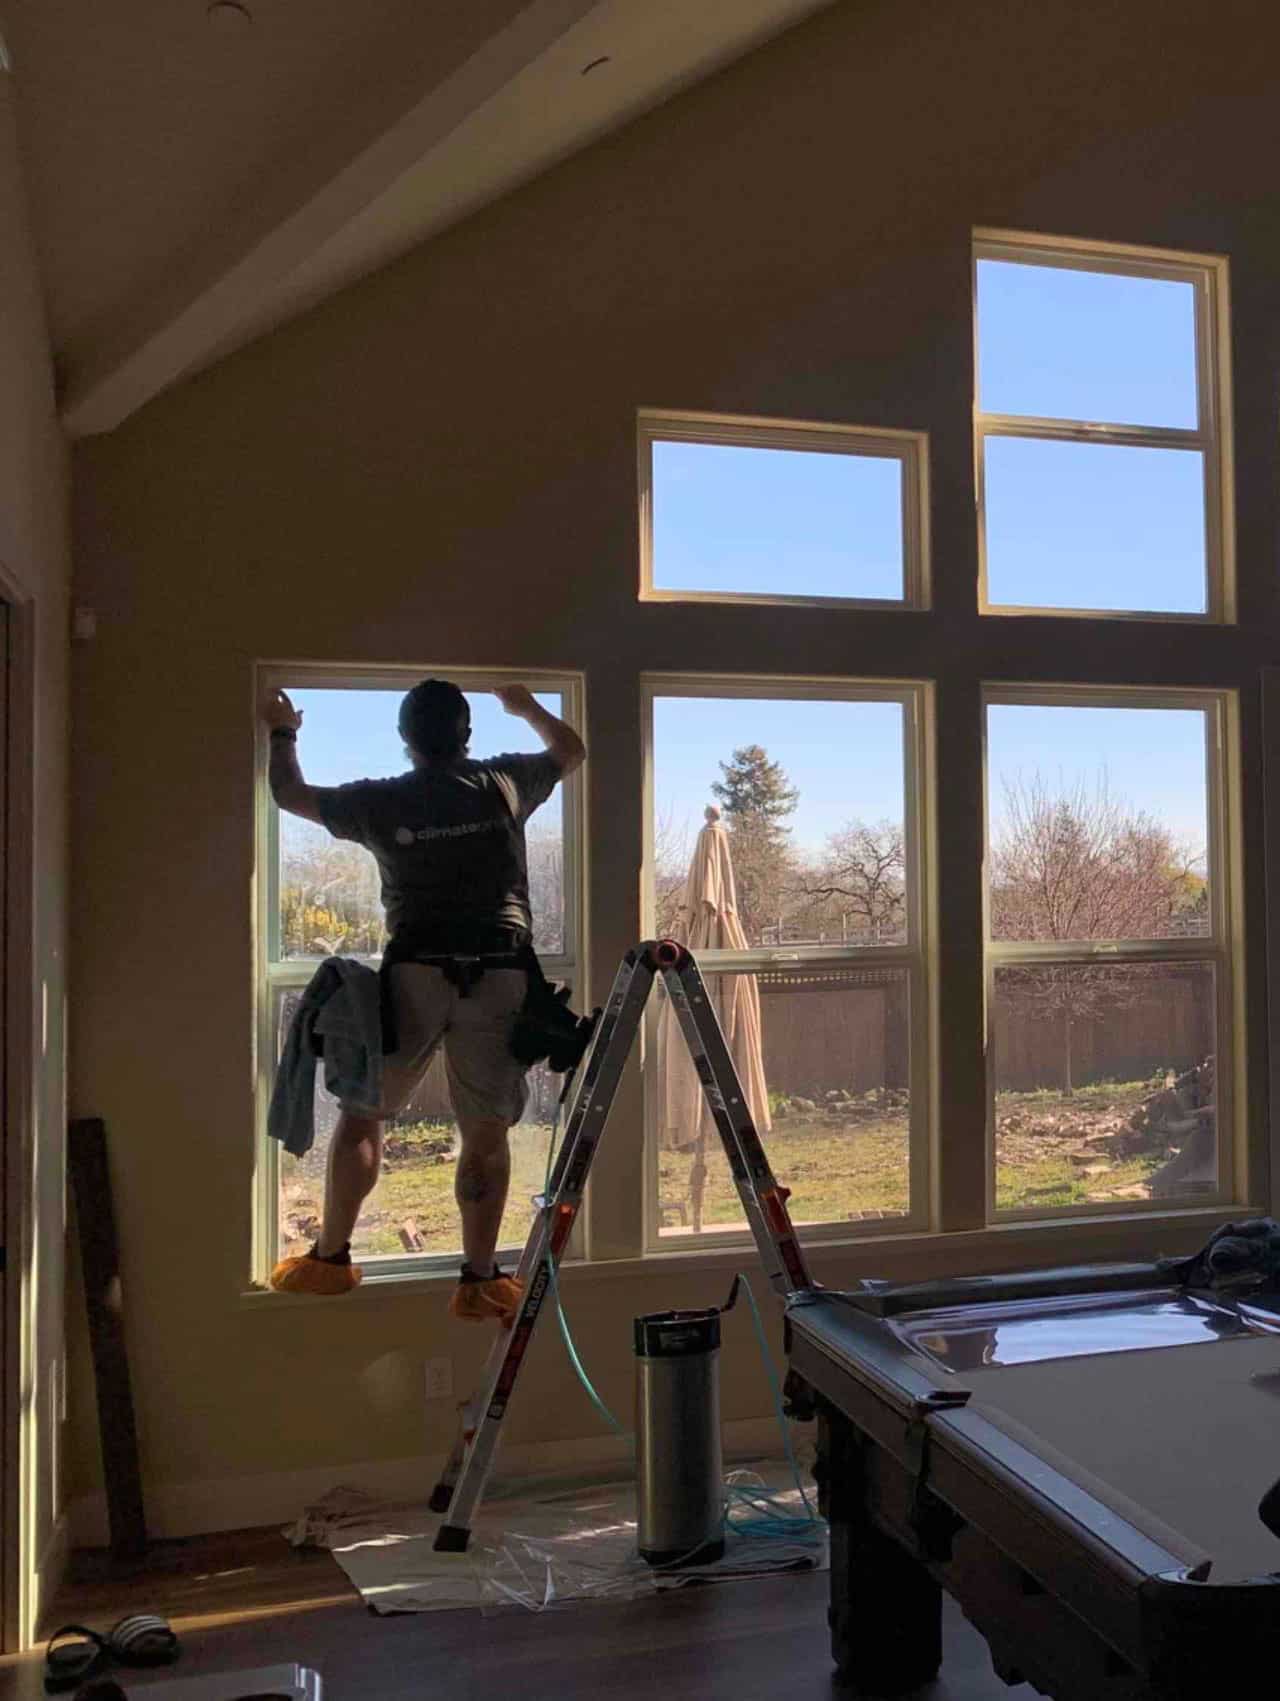 ClimatePro installed 3M Prestige 70 Window Film for A Grand Room in Windsor, CA